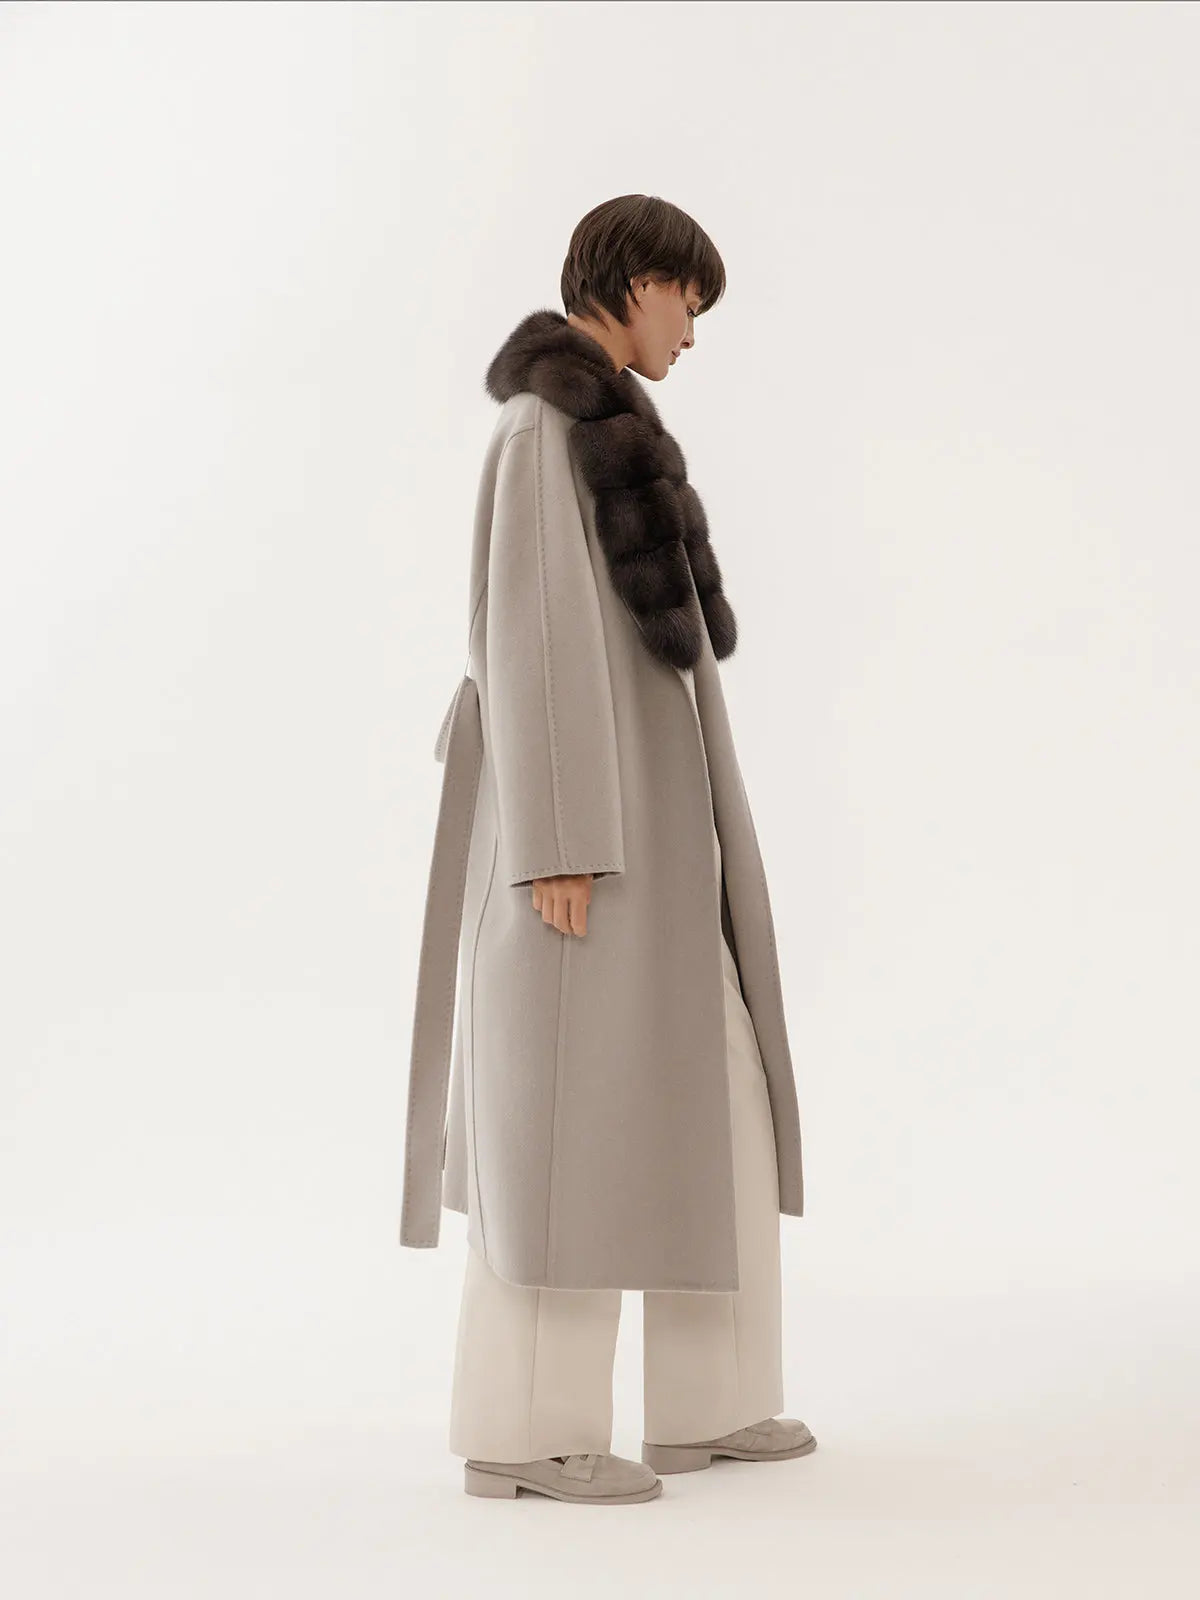 Olive colored cashmere coat with sable collar